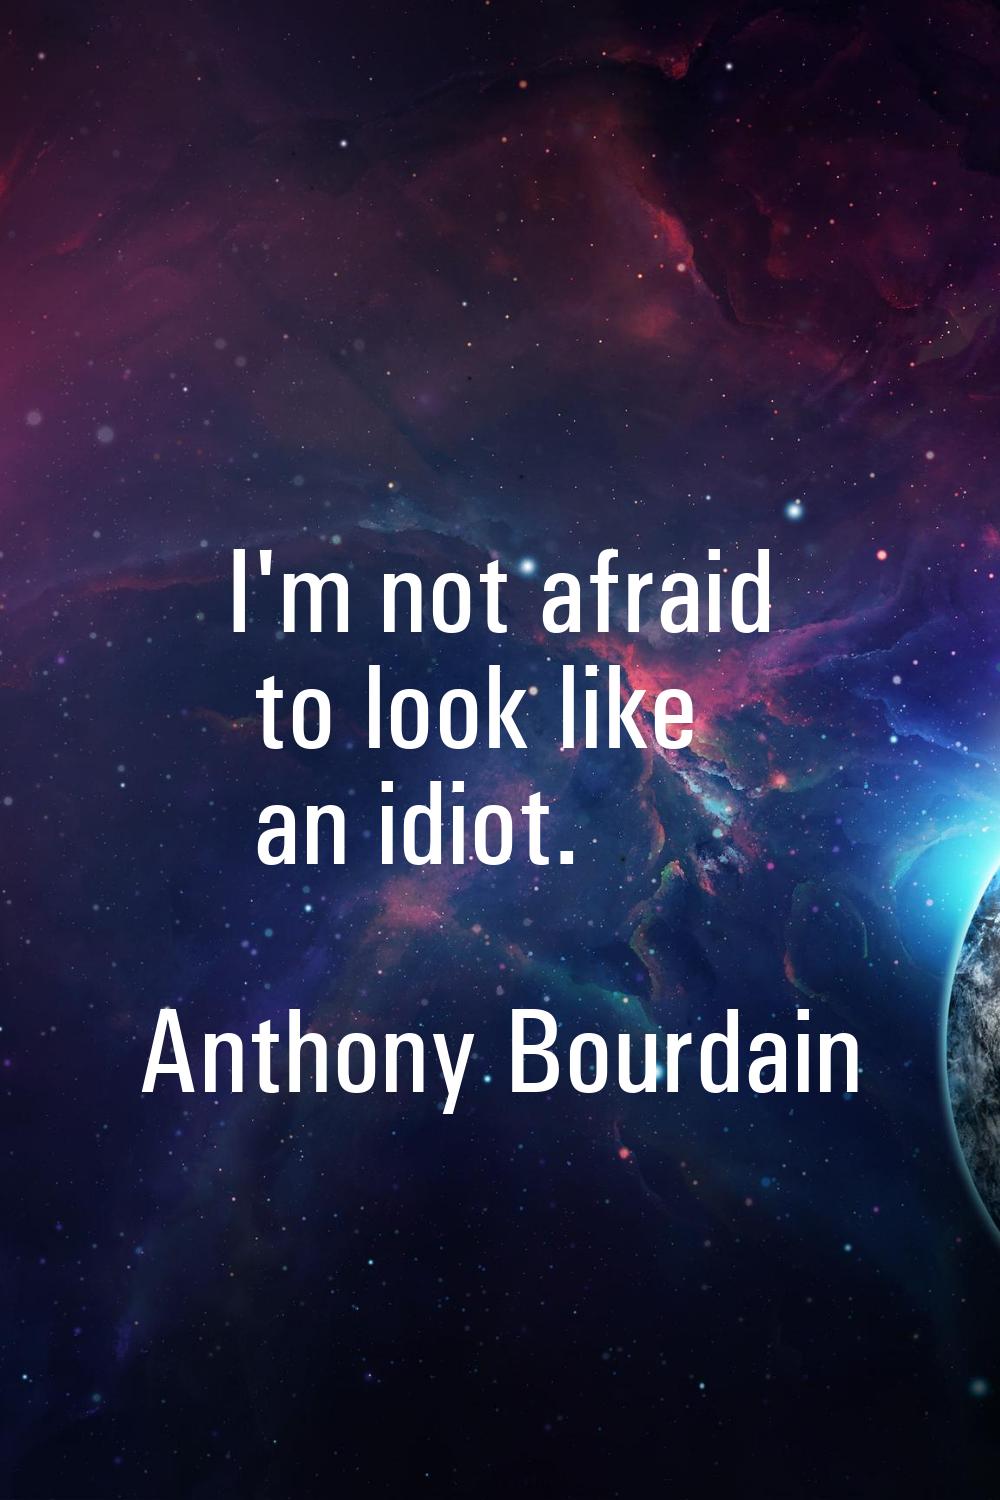 I'm not afraid to look like an idiot.